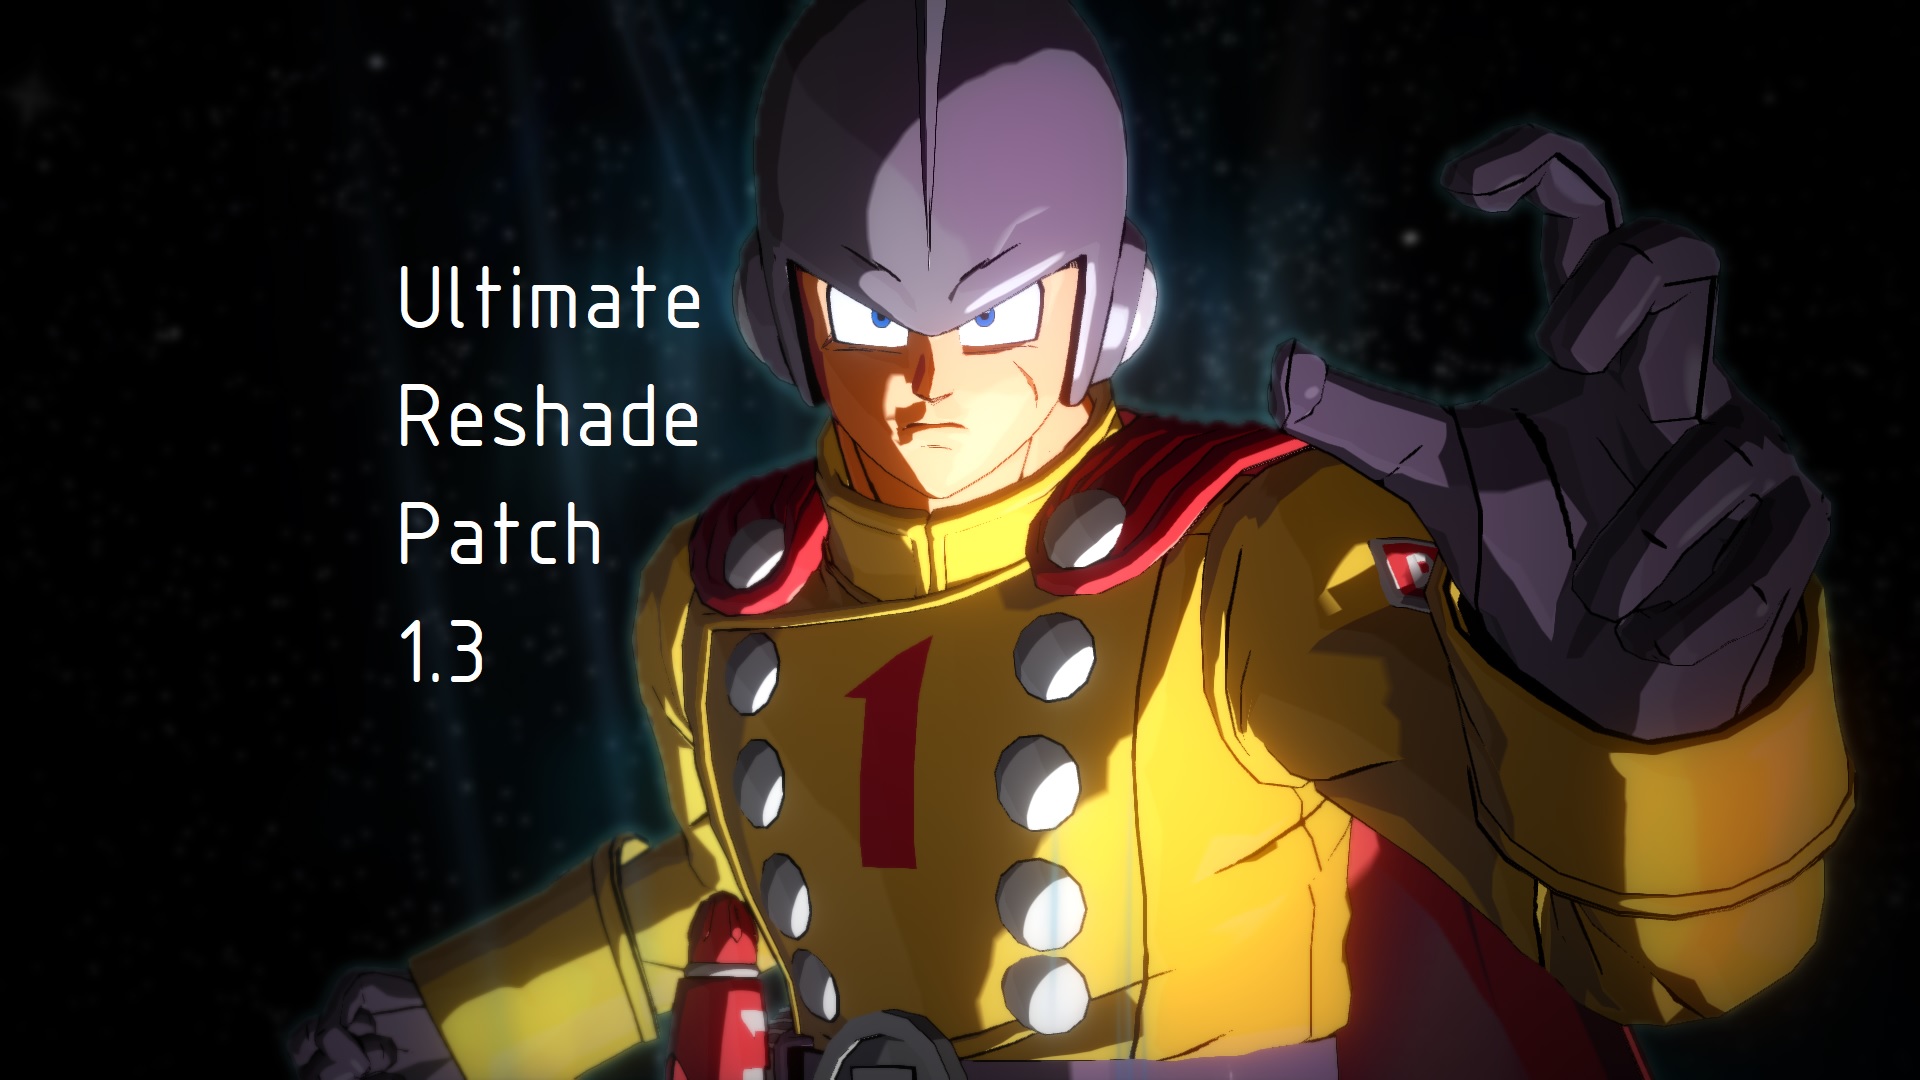 Ultimate Reshade Patch 1.3